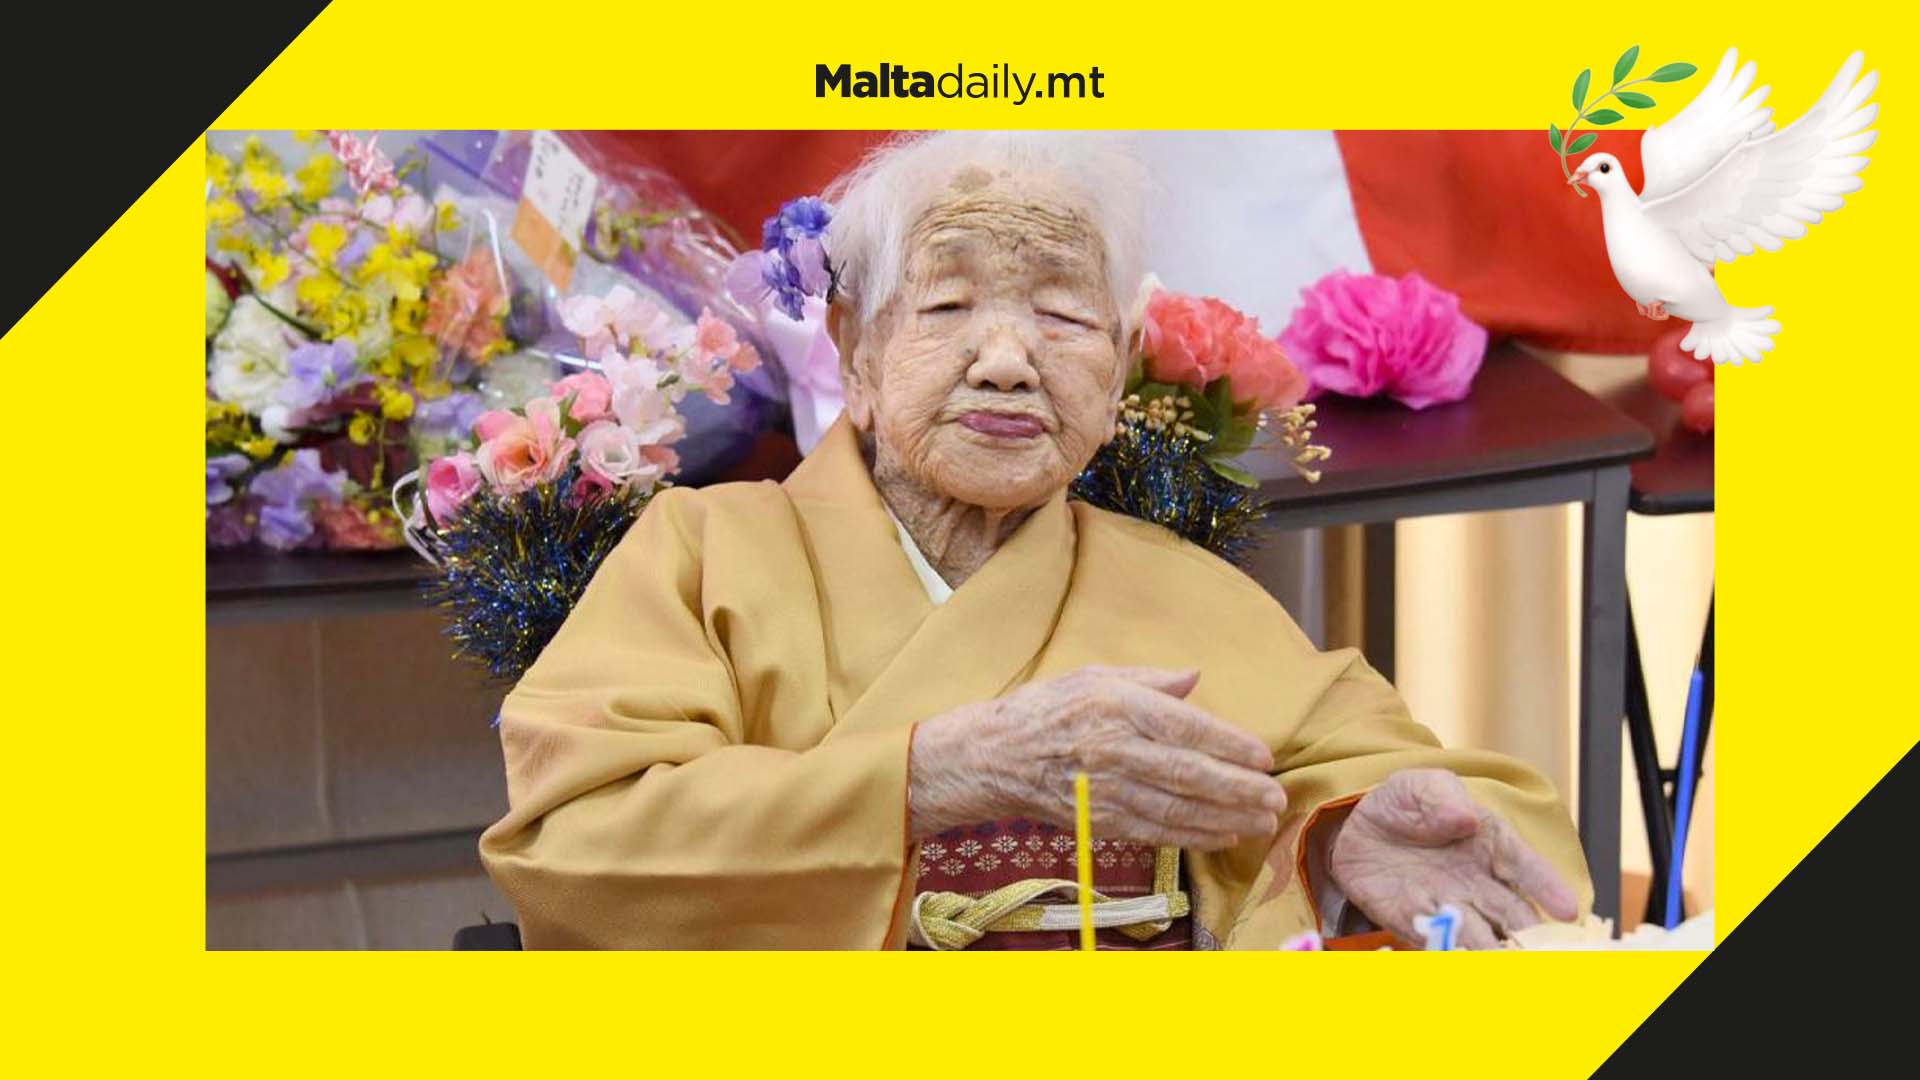 World’s oldest person Kane Tanaka dies aged 119 in Japan